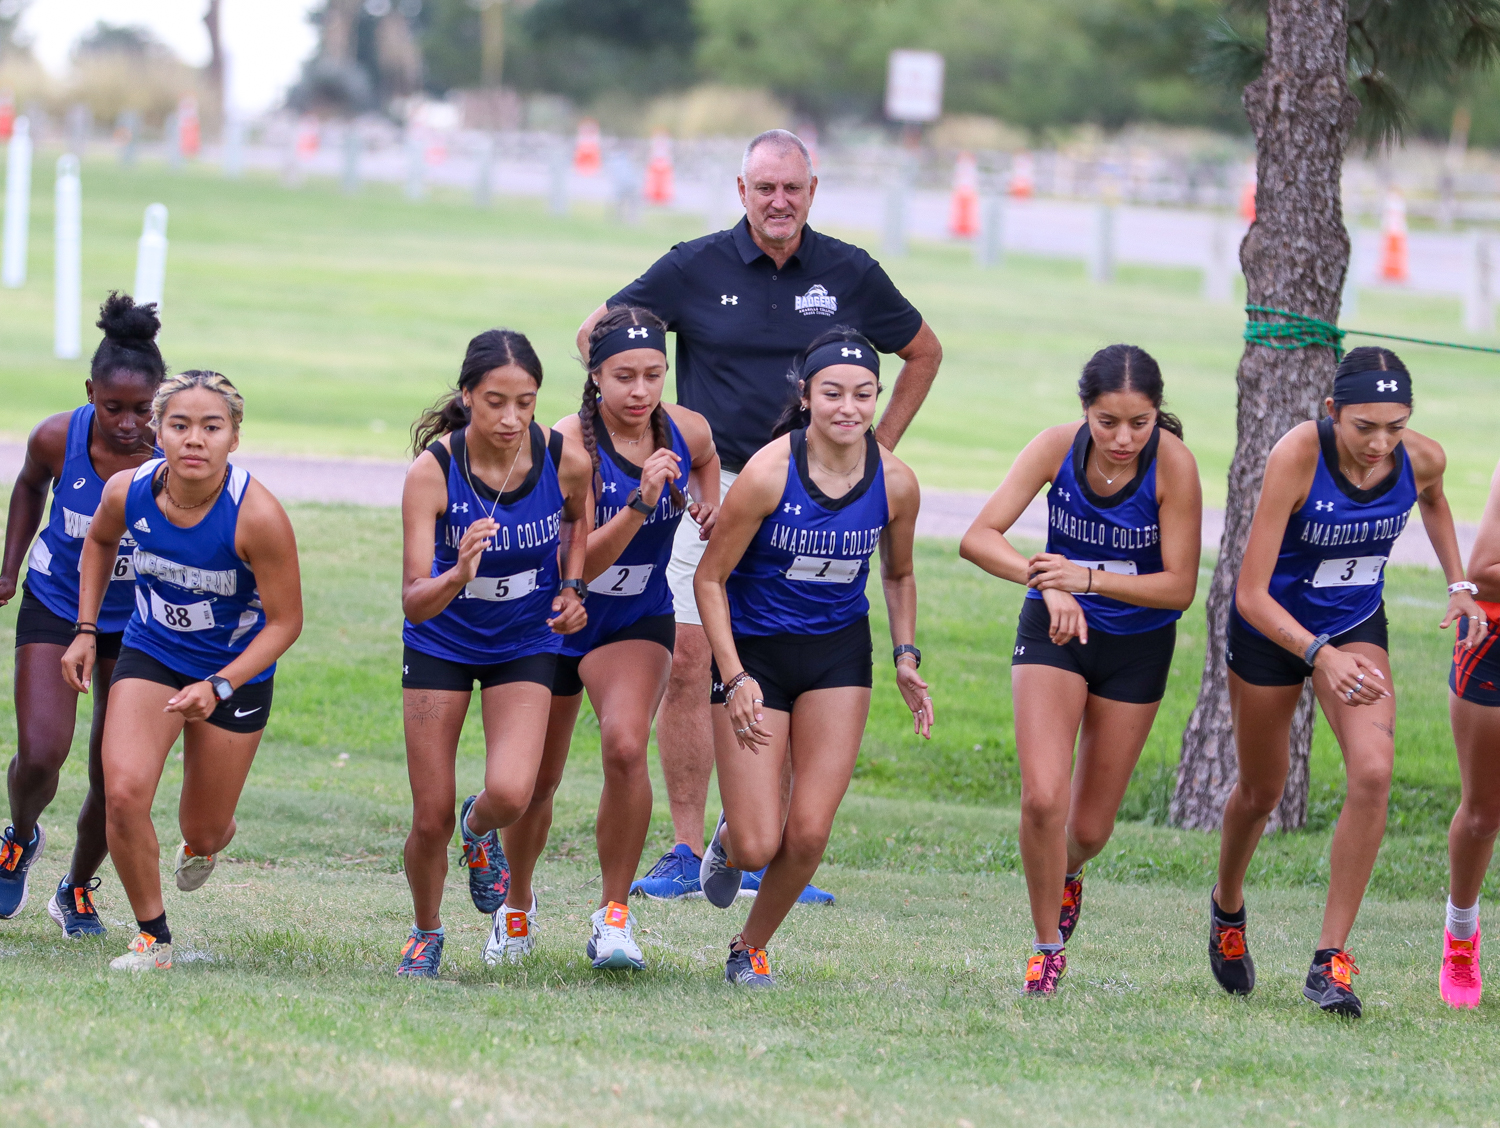 Lady Badger XC team takes off from starting lineup at Harry McAdams Park.